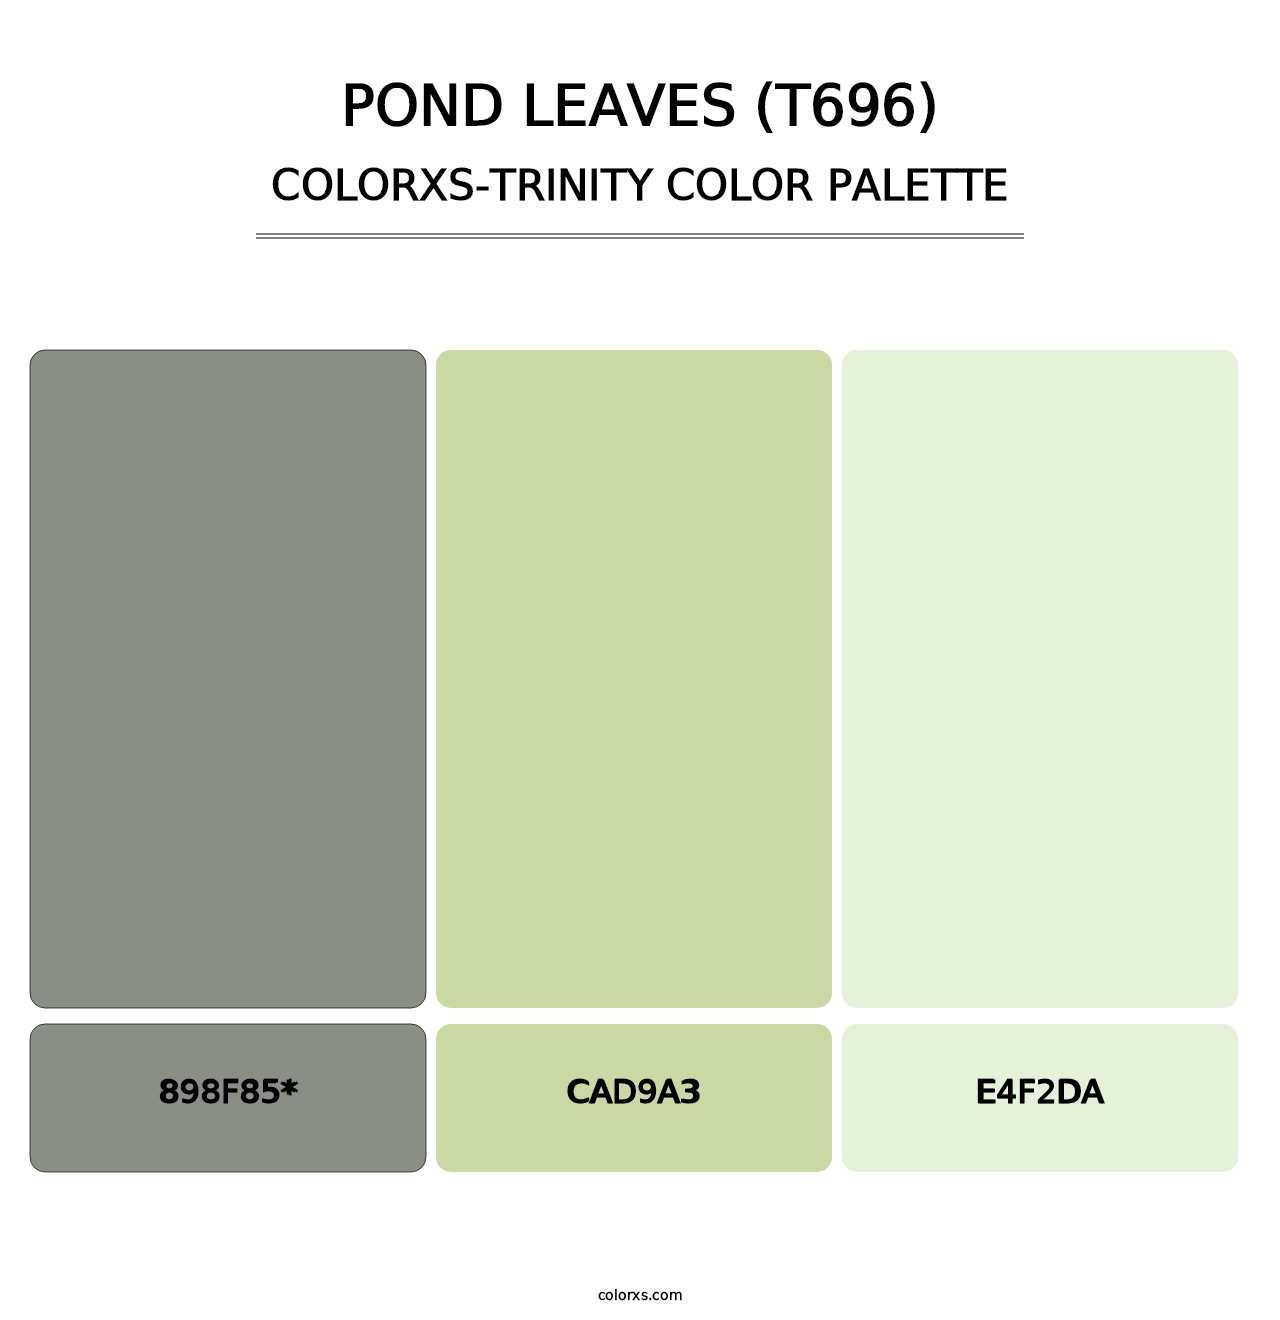 Pond Leaves (T696) - Colorxs Trinity Palette